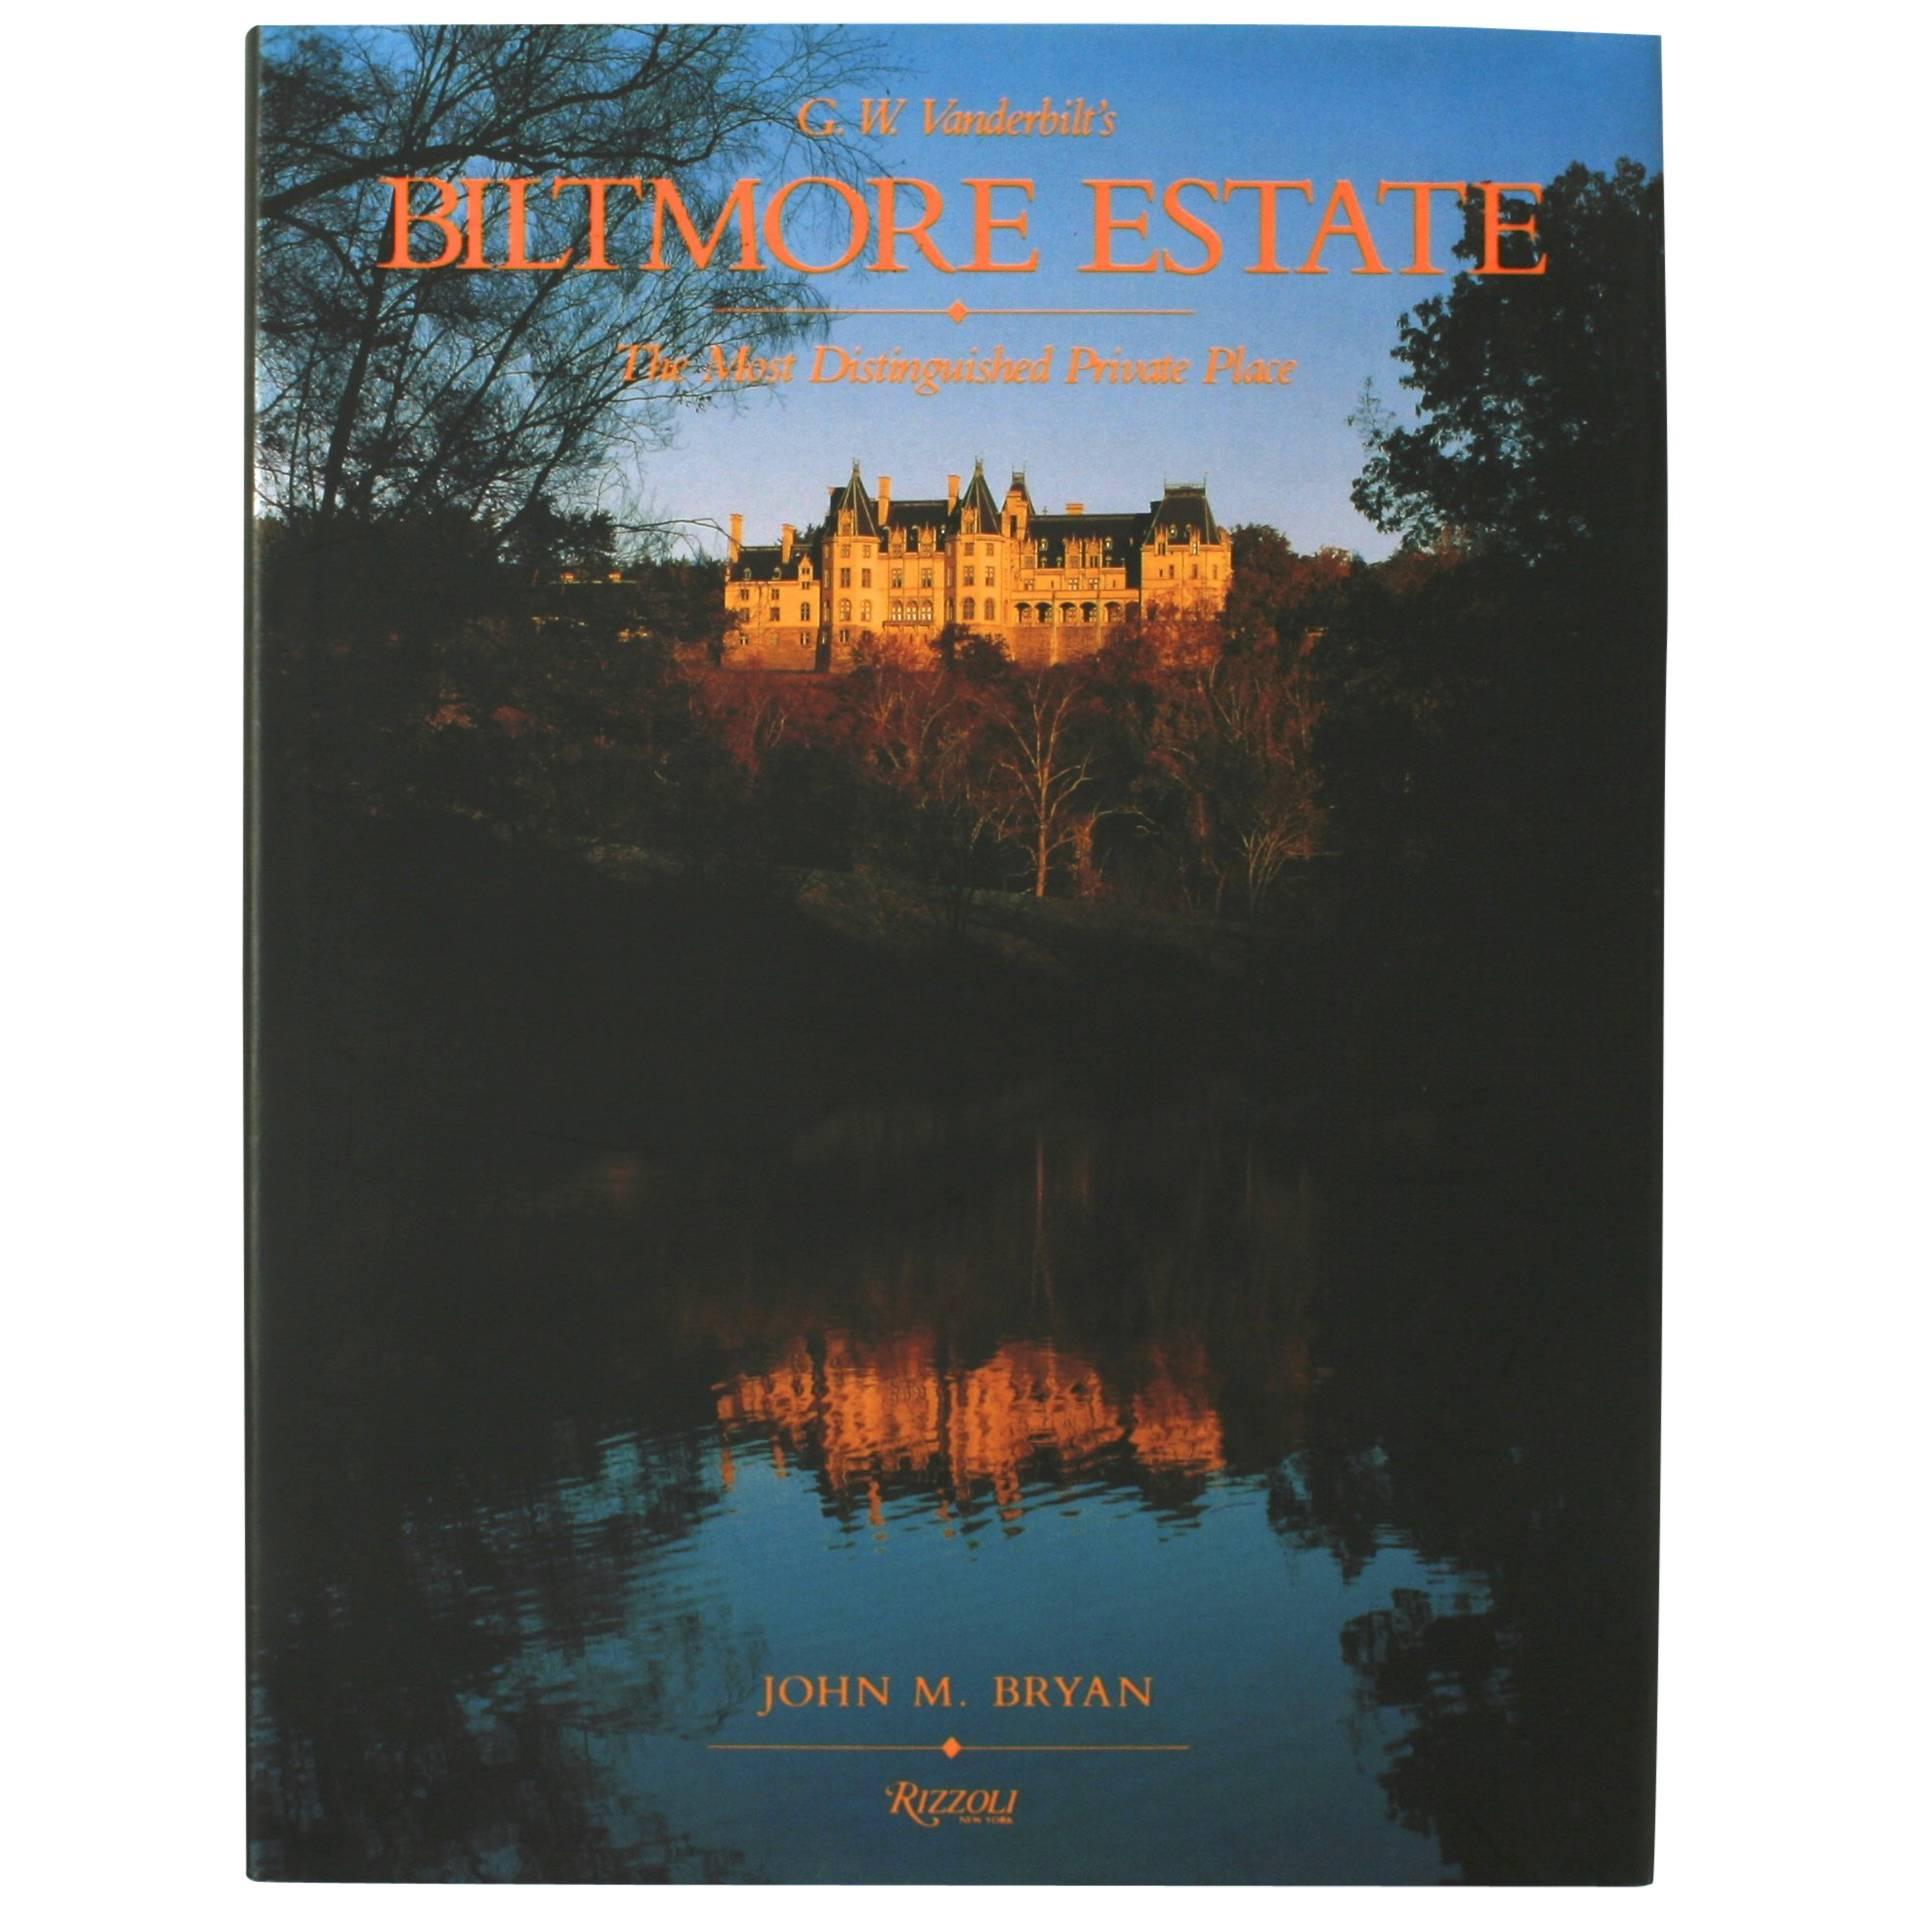 The Biltmore Estate, The Most Distinguished Private Place, First Edition